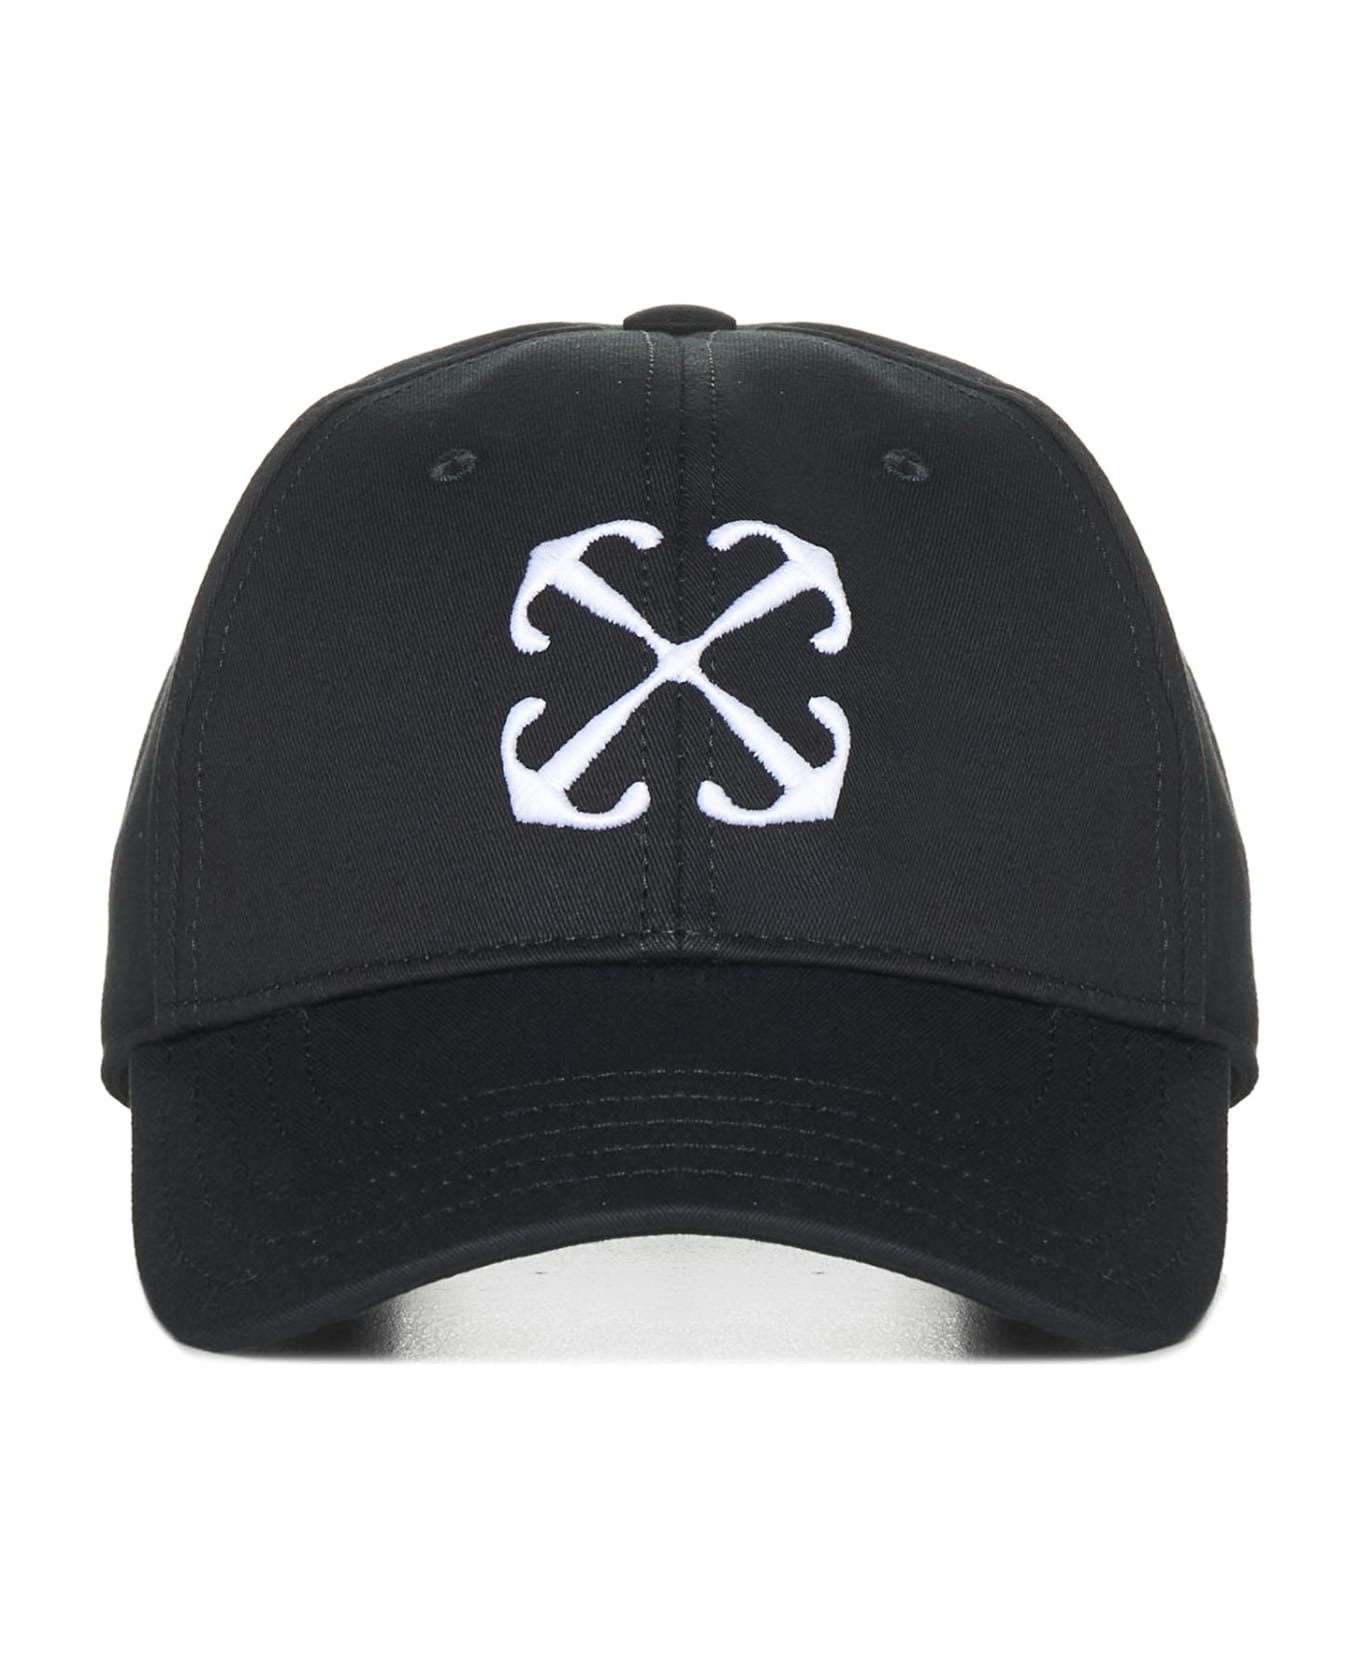 Off-White Baseball Cap With Embroidery - Black white 帽子